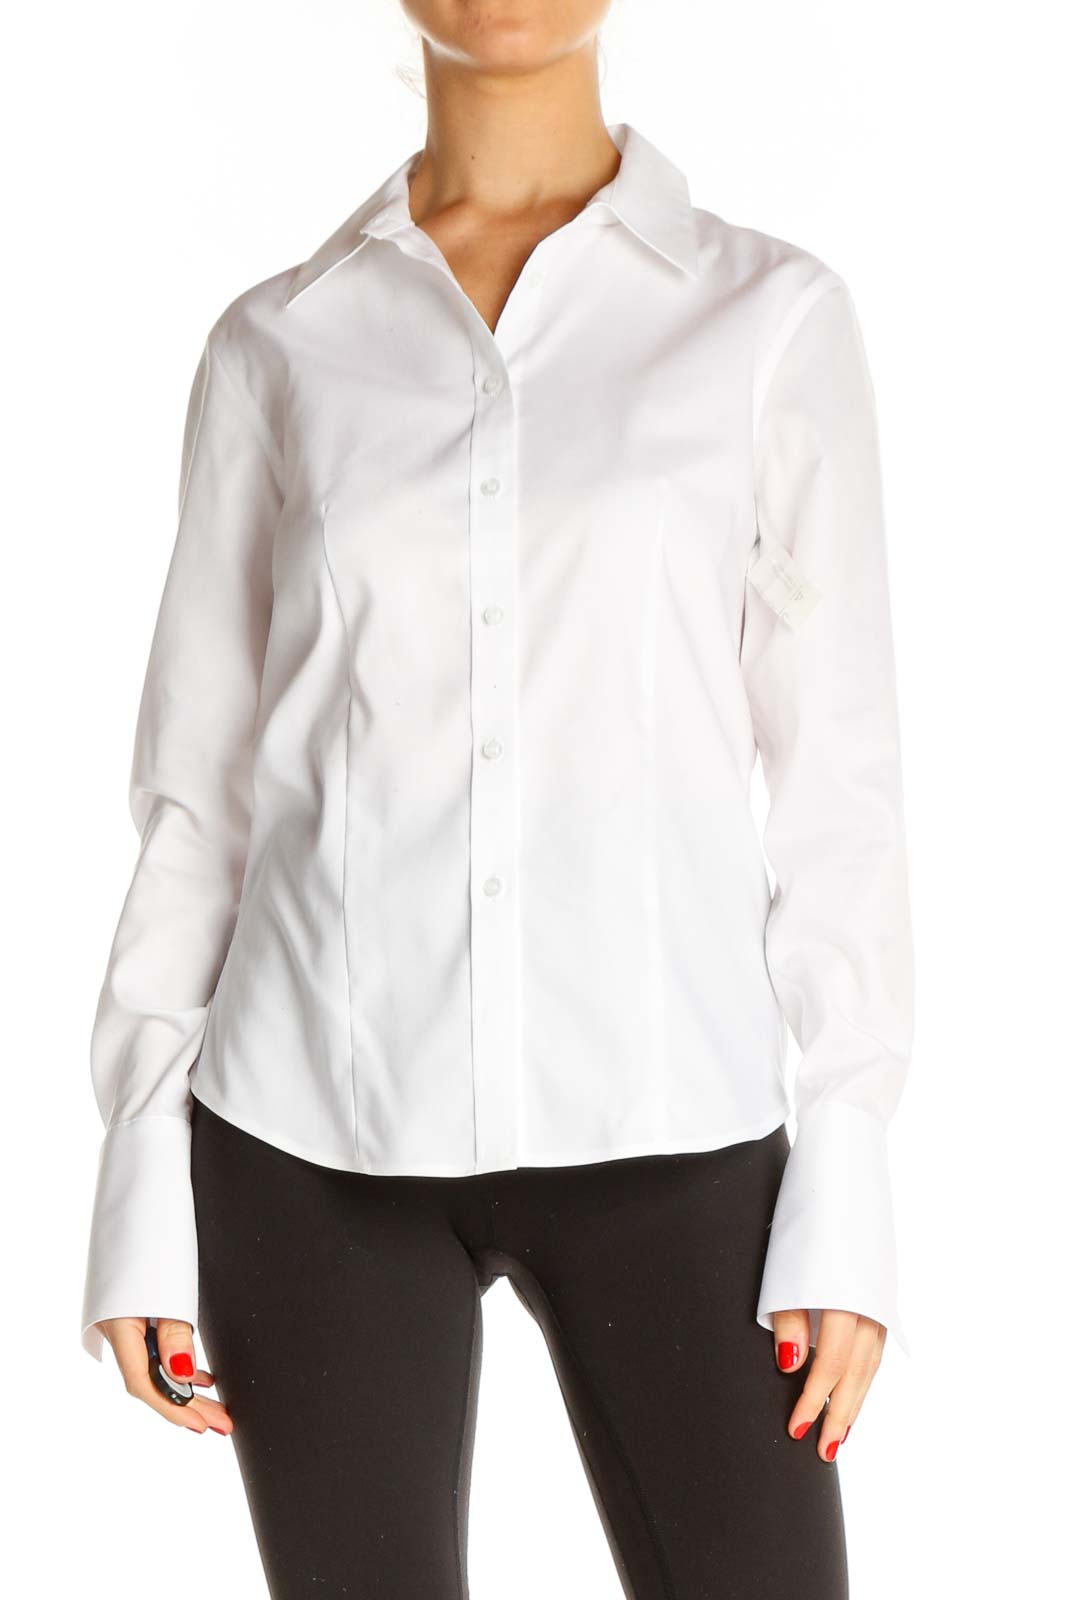 White Solid Work Shirt Front